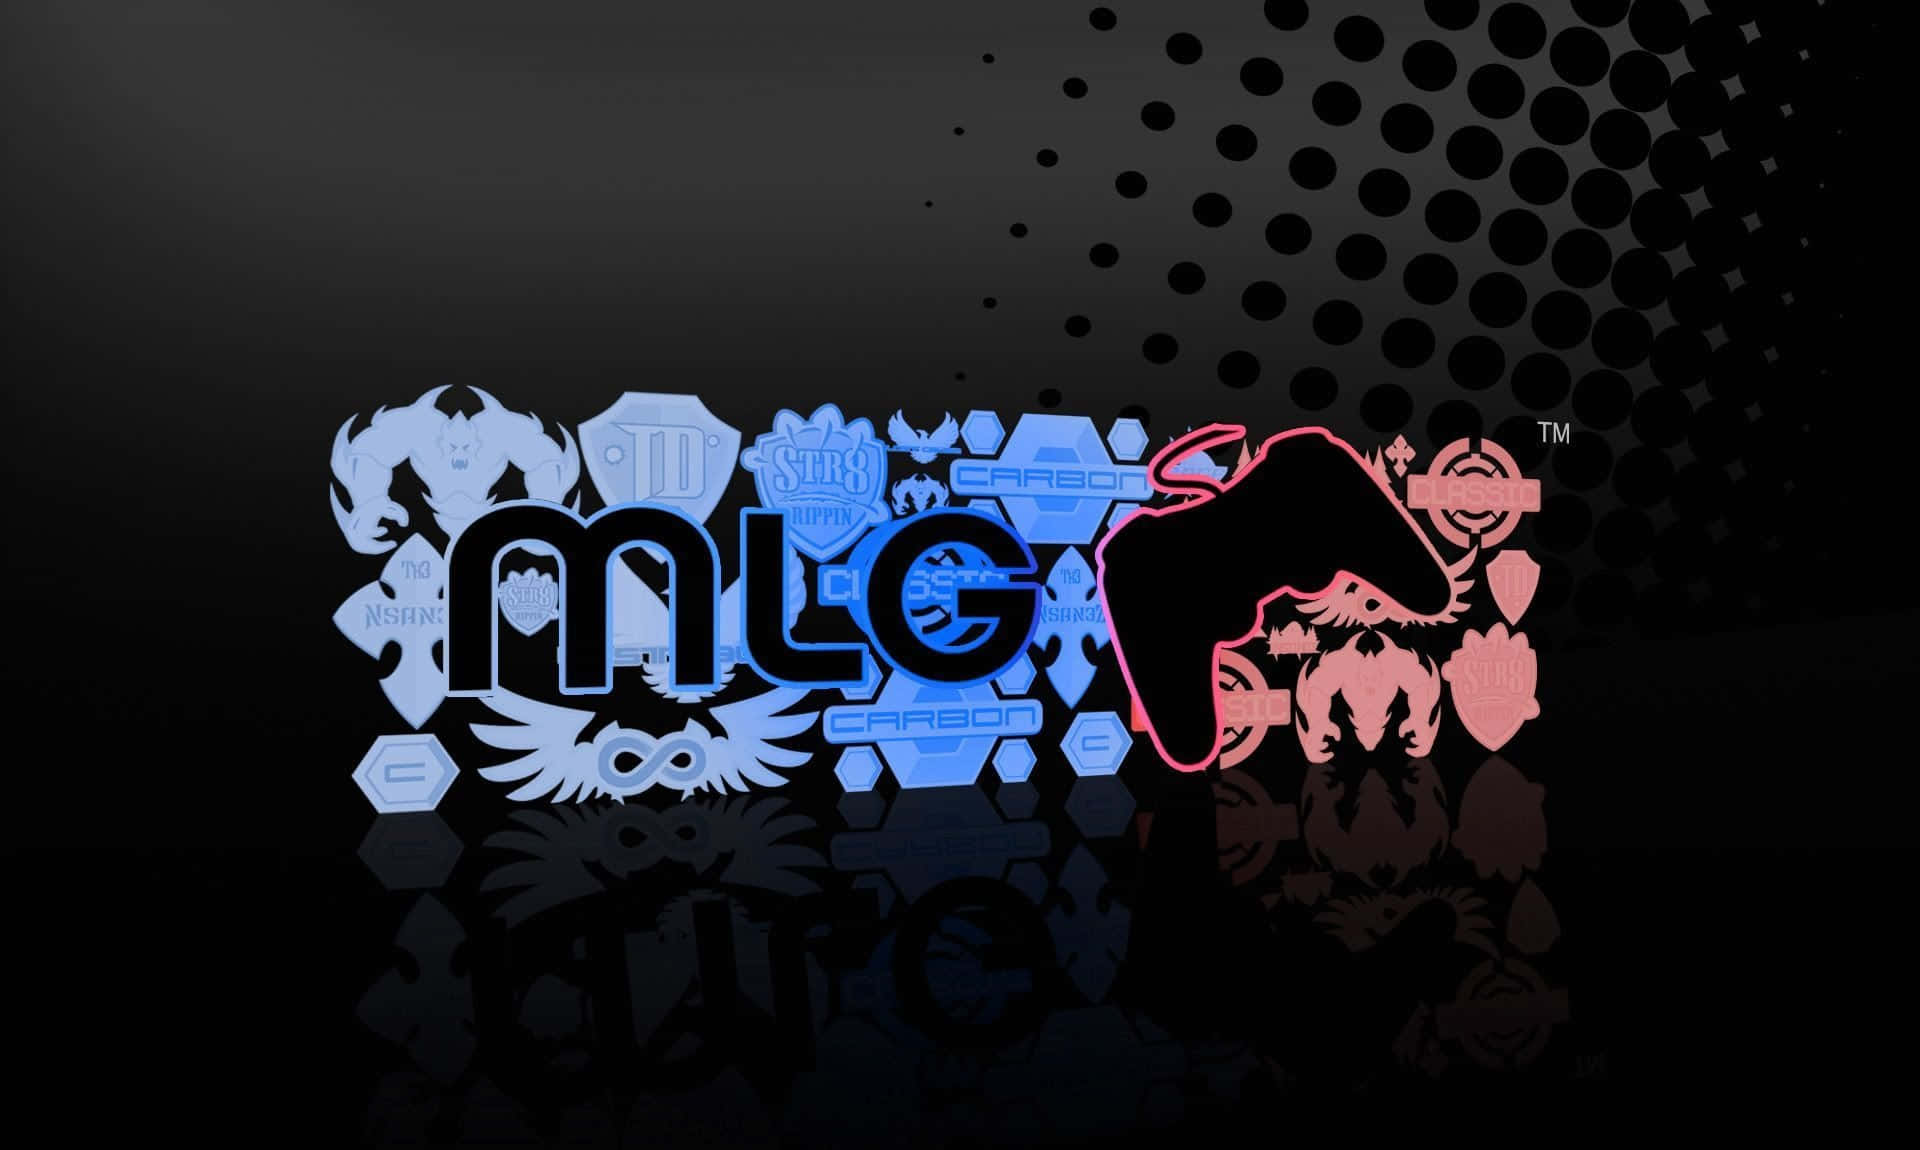 Experience MLG with this amazing high-quality background